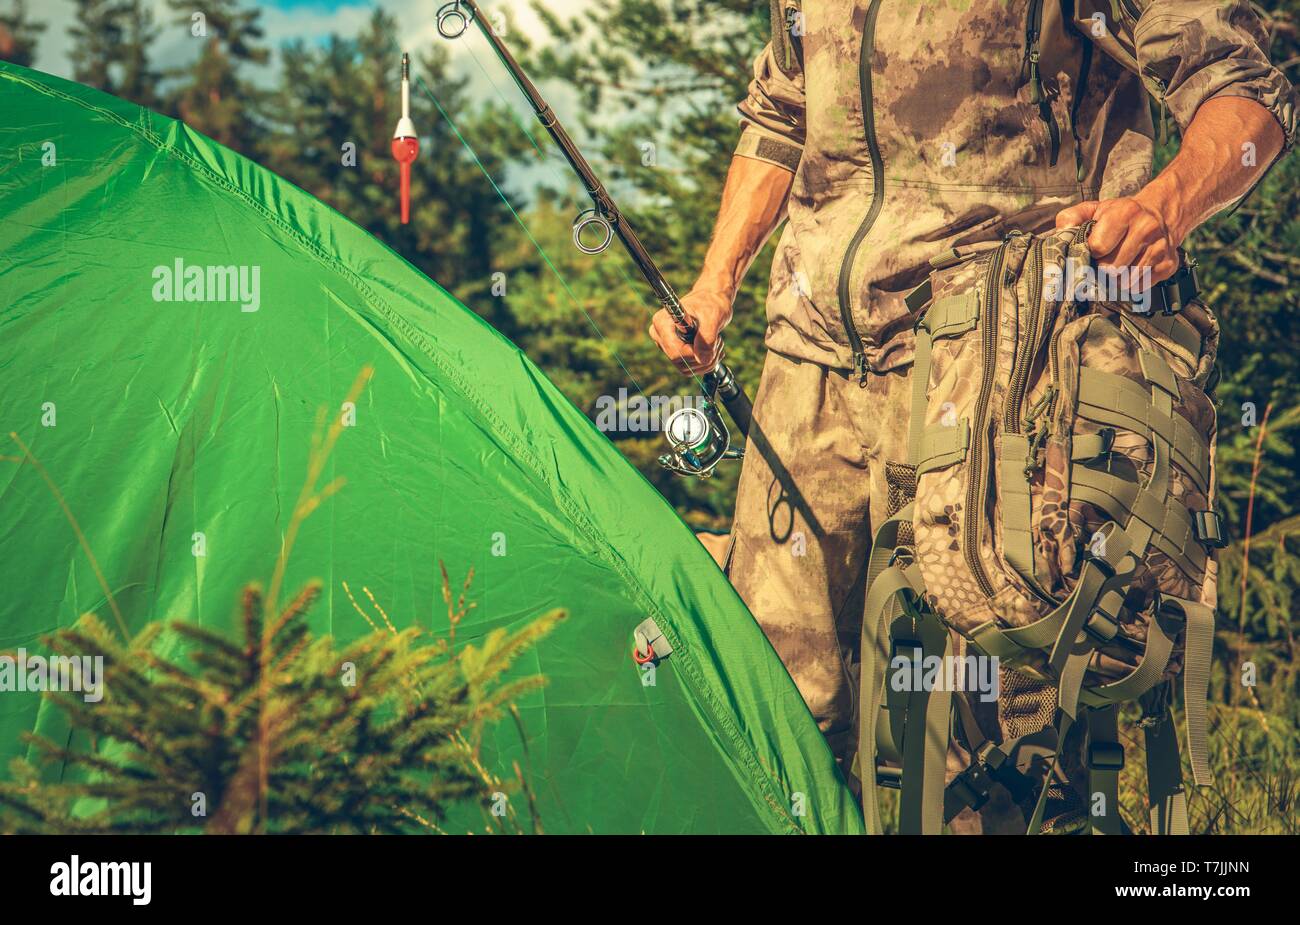 Fishing Camp Spot. Caucasian Men with Fishing Rod in Front of His Tent. Summer Activities. Stock Photo